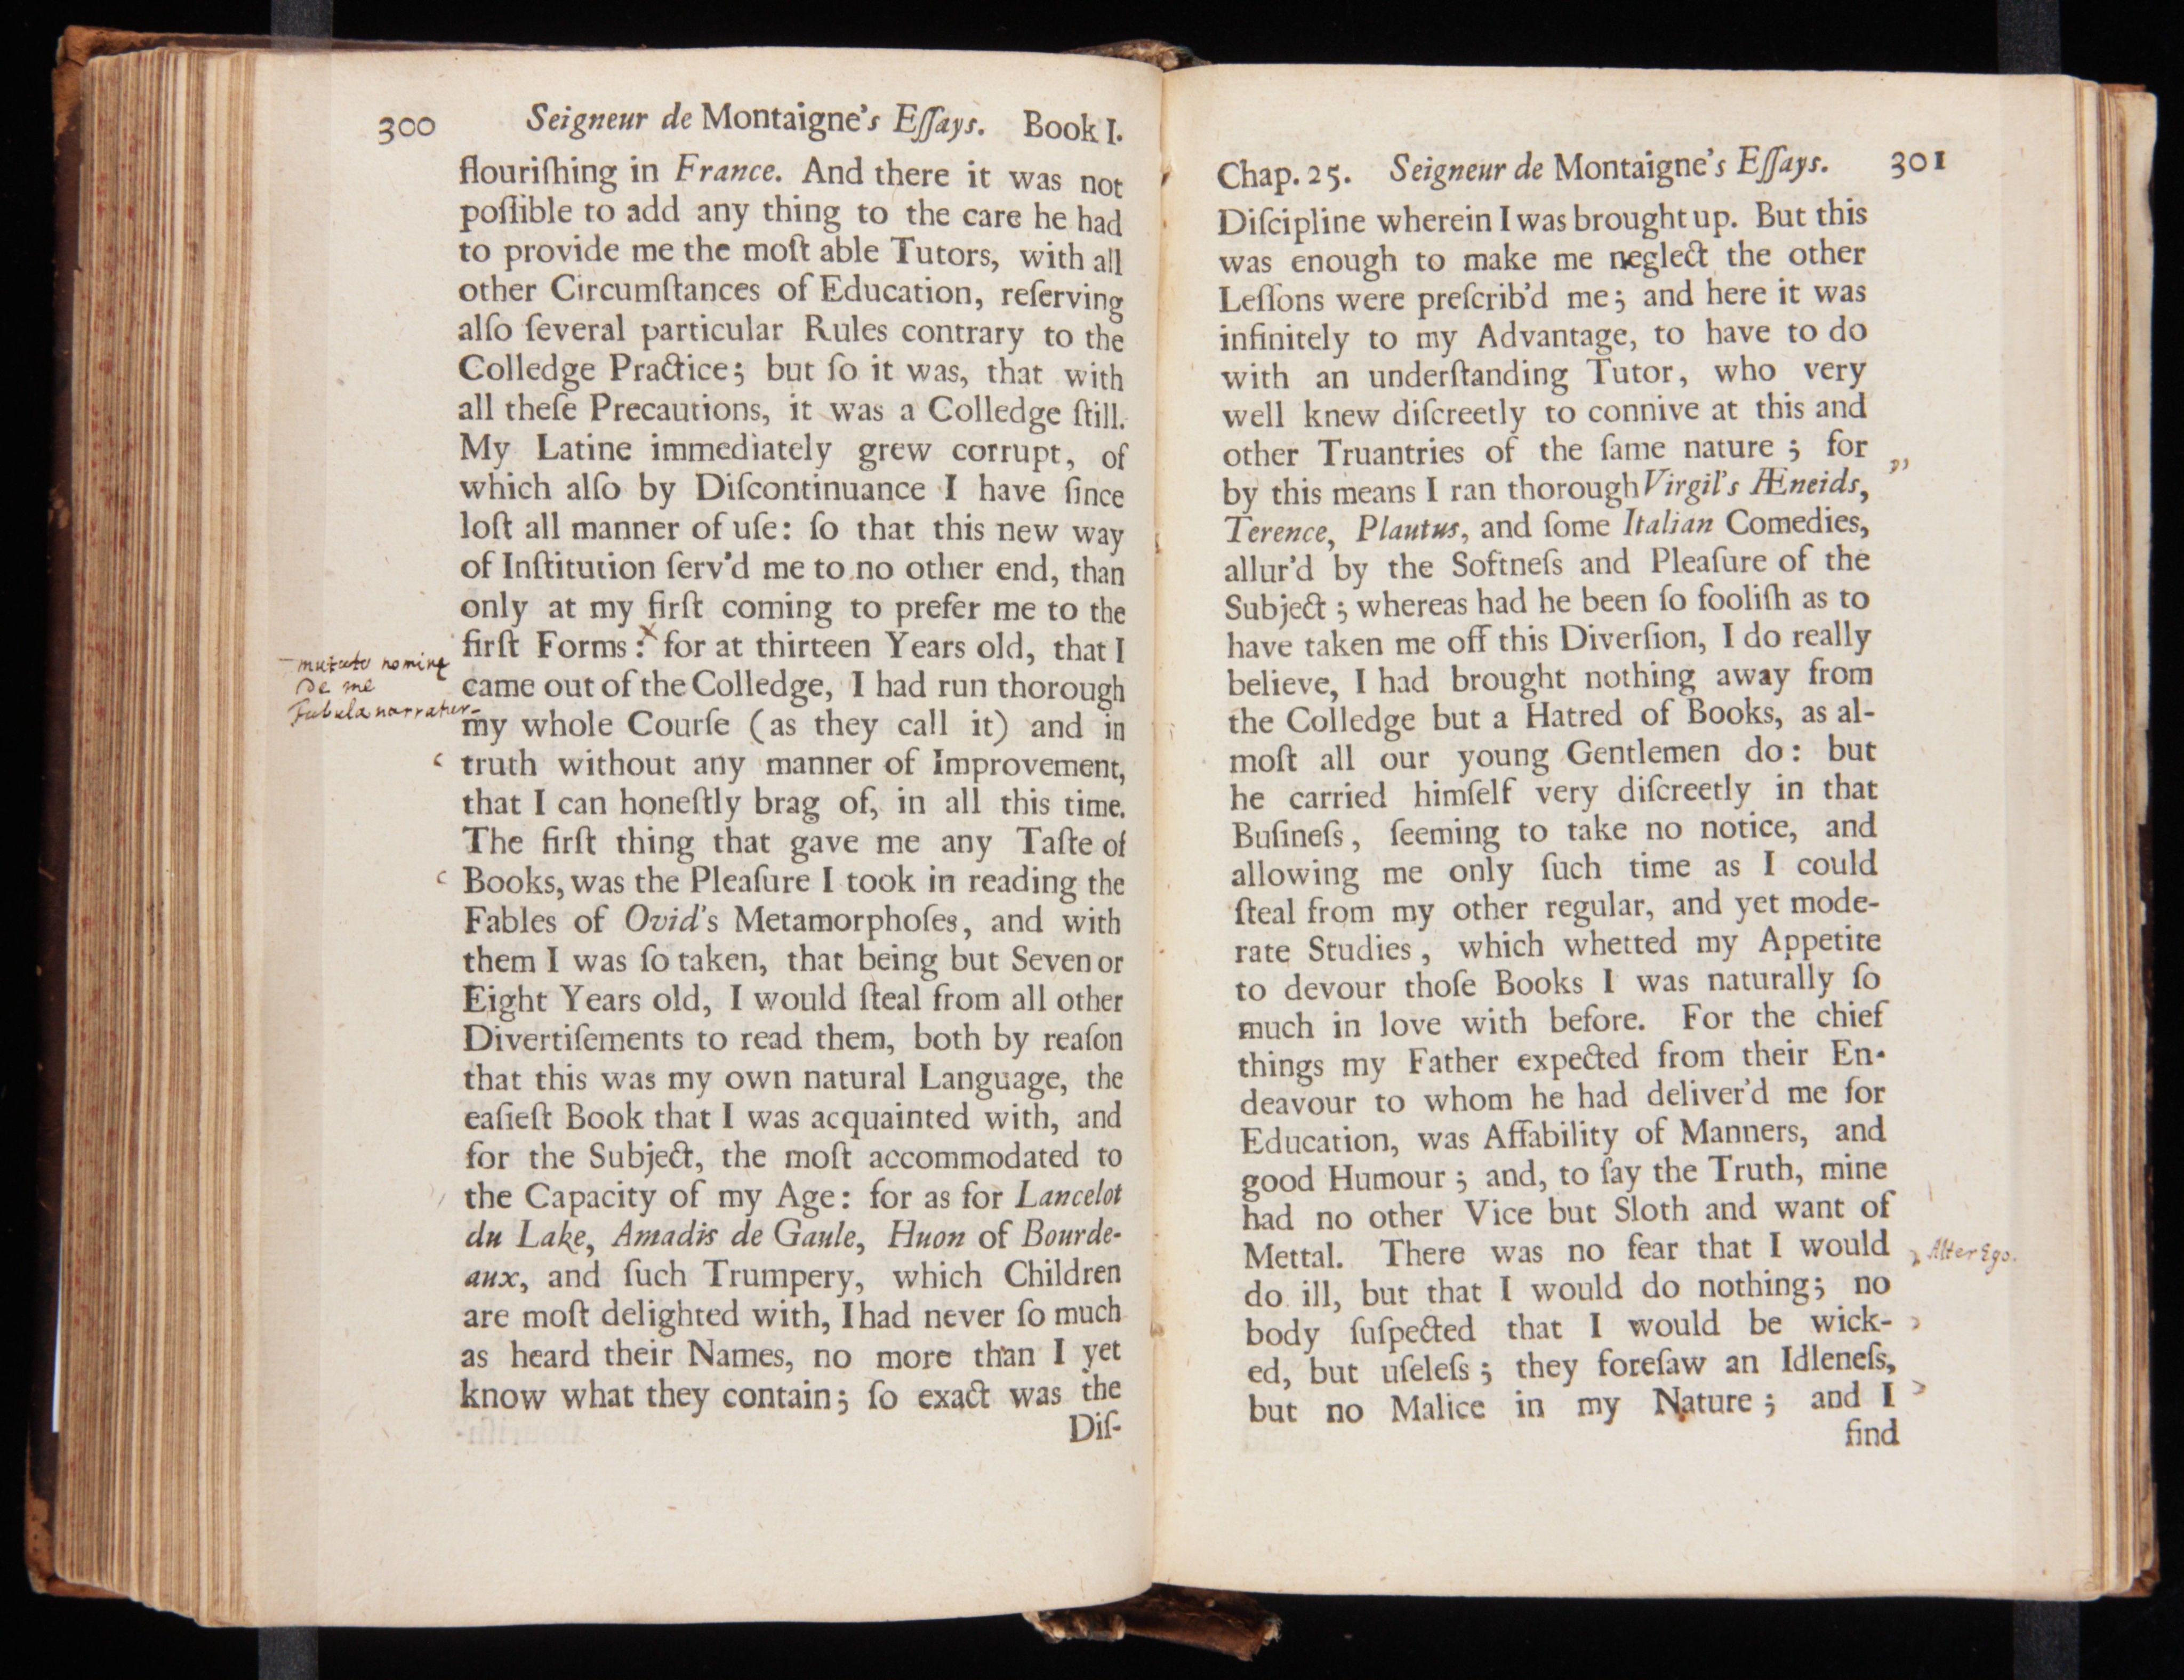 Extract from Essays of Michael, Seigneur de Montaigne: in three books. Written in the margins in Pope's handwriting, he has added his own commentary about the text, available from Yale University Library online.